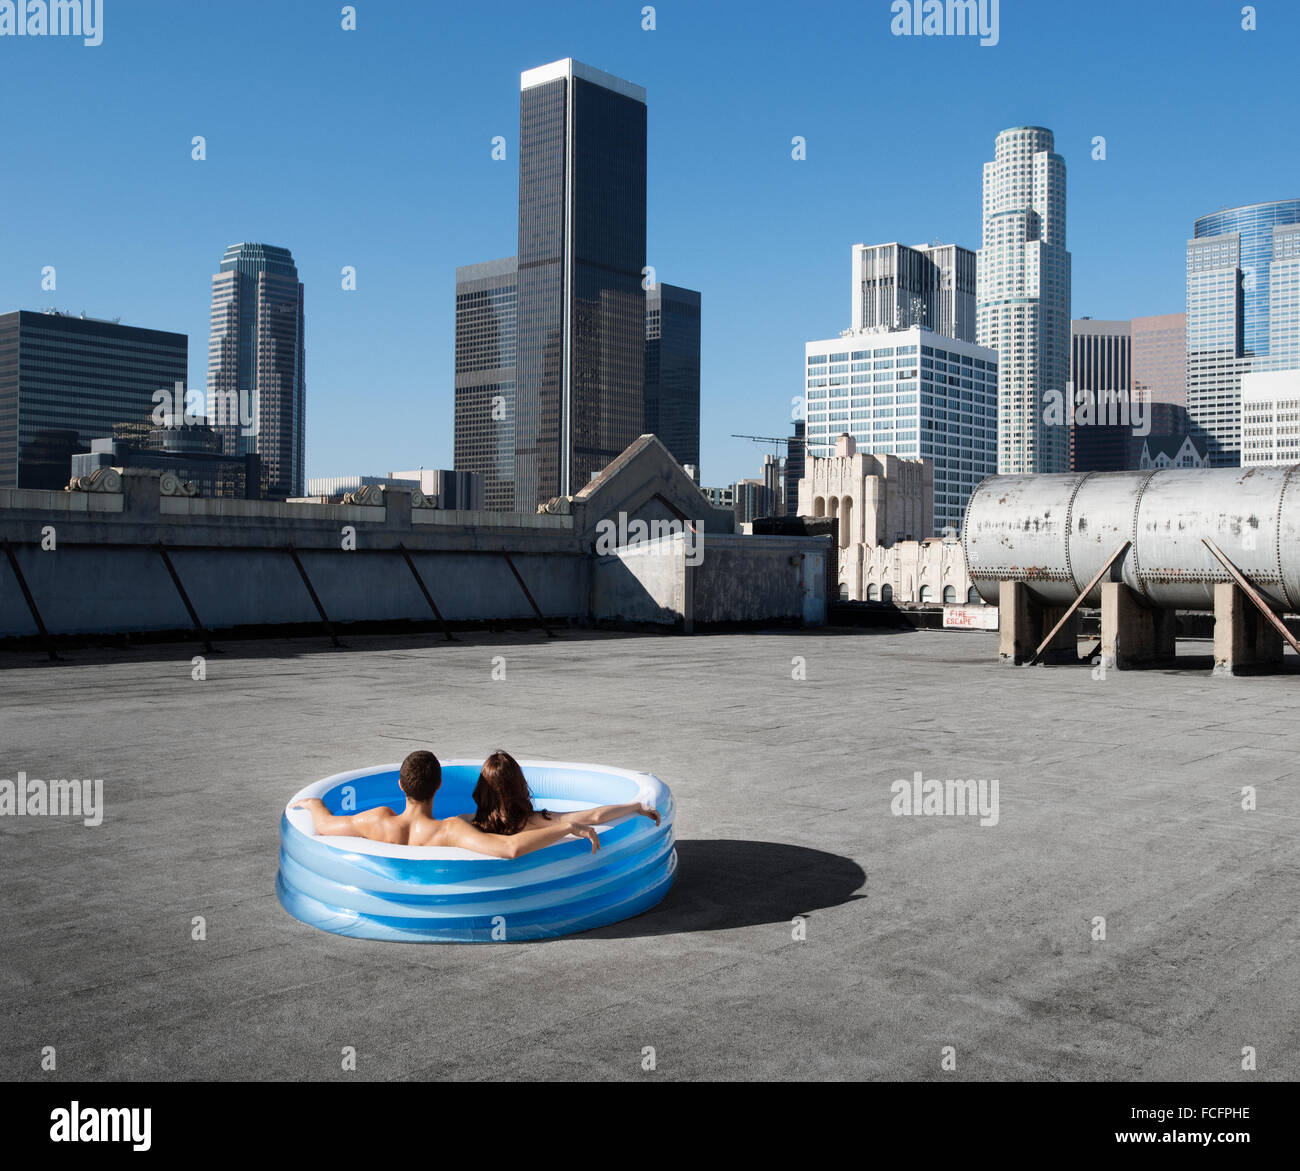 A couple, a man and woman sitting in a small inflatable water pool on a city rooftop, cooling down. Stock Photo